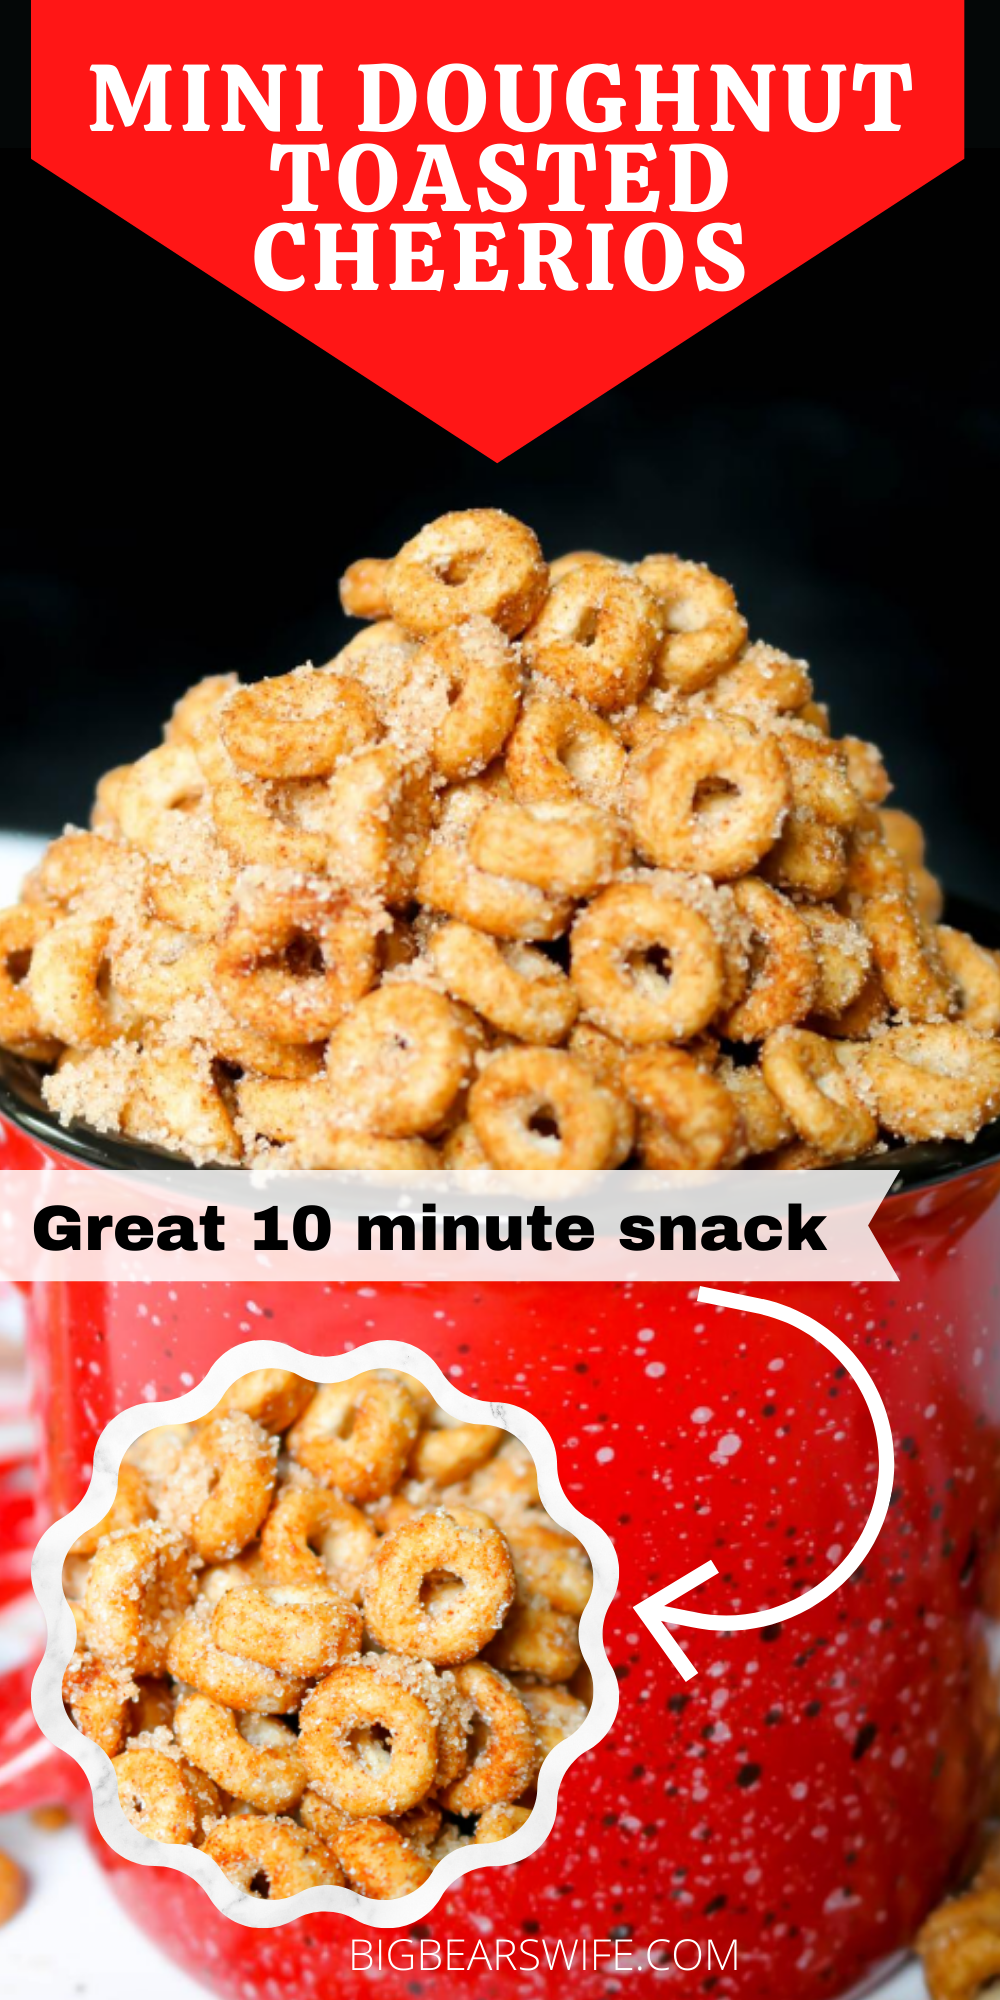 These Mini Doughnut Hot Buttered Toasted Cheerios are a perfect sweet treat and super easy to make! Toasted Cheerios are perfect for snacking! via @bigbearswife